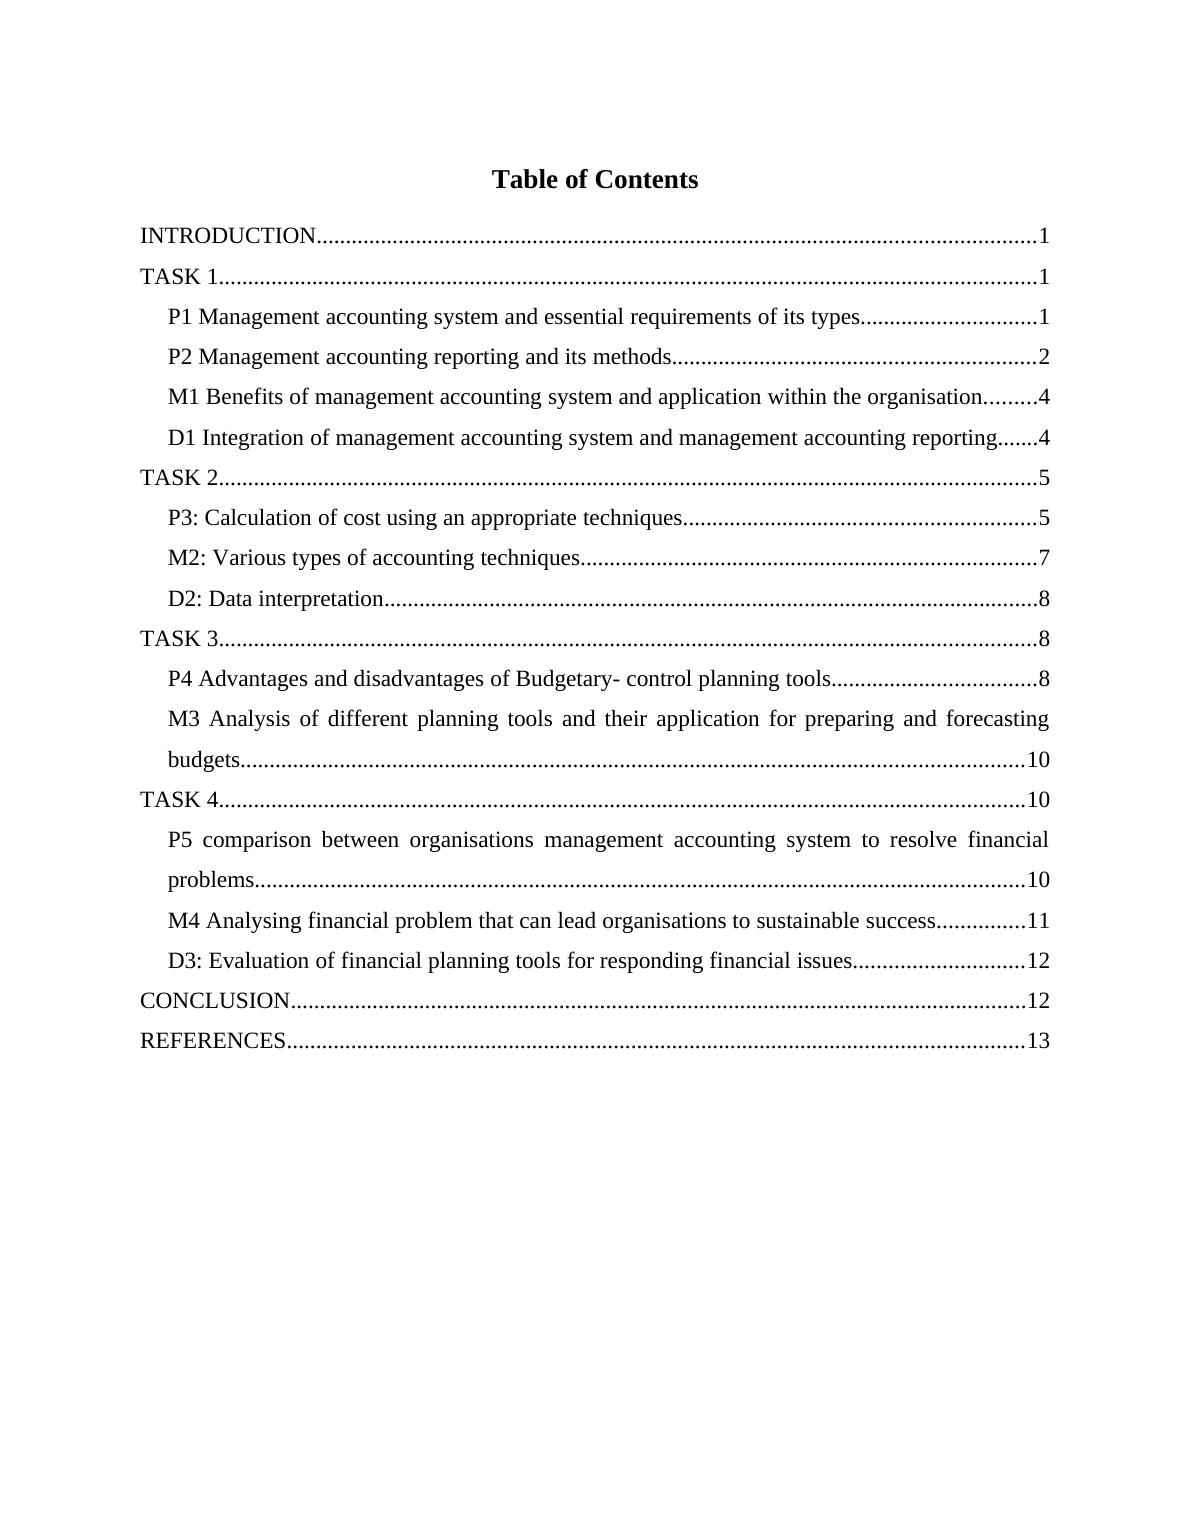 Management Accounting System and Requirements Doc_2